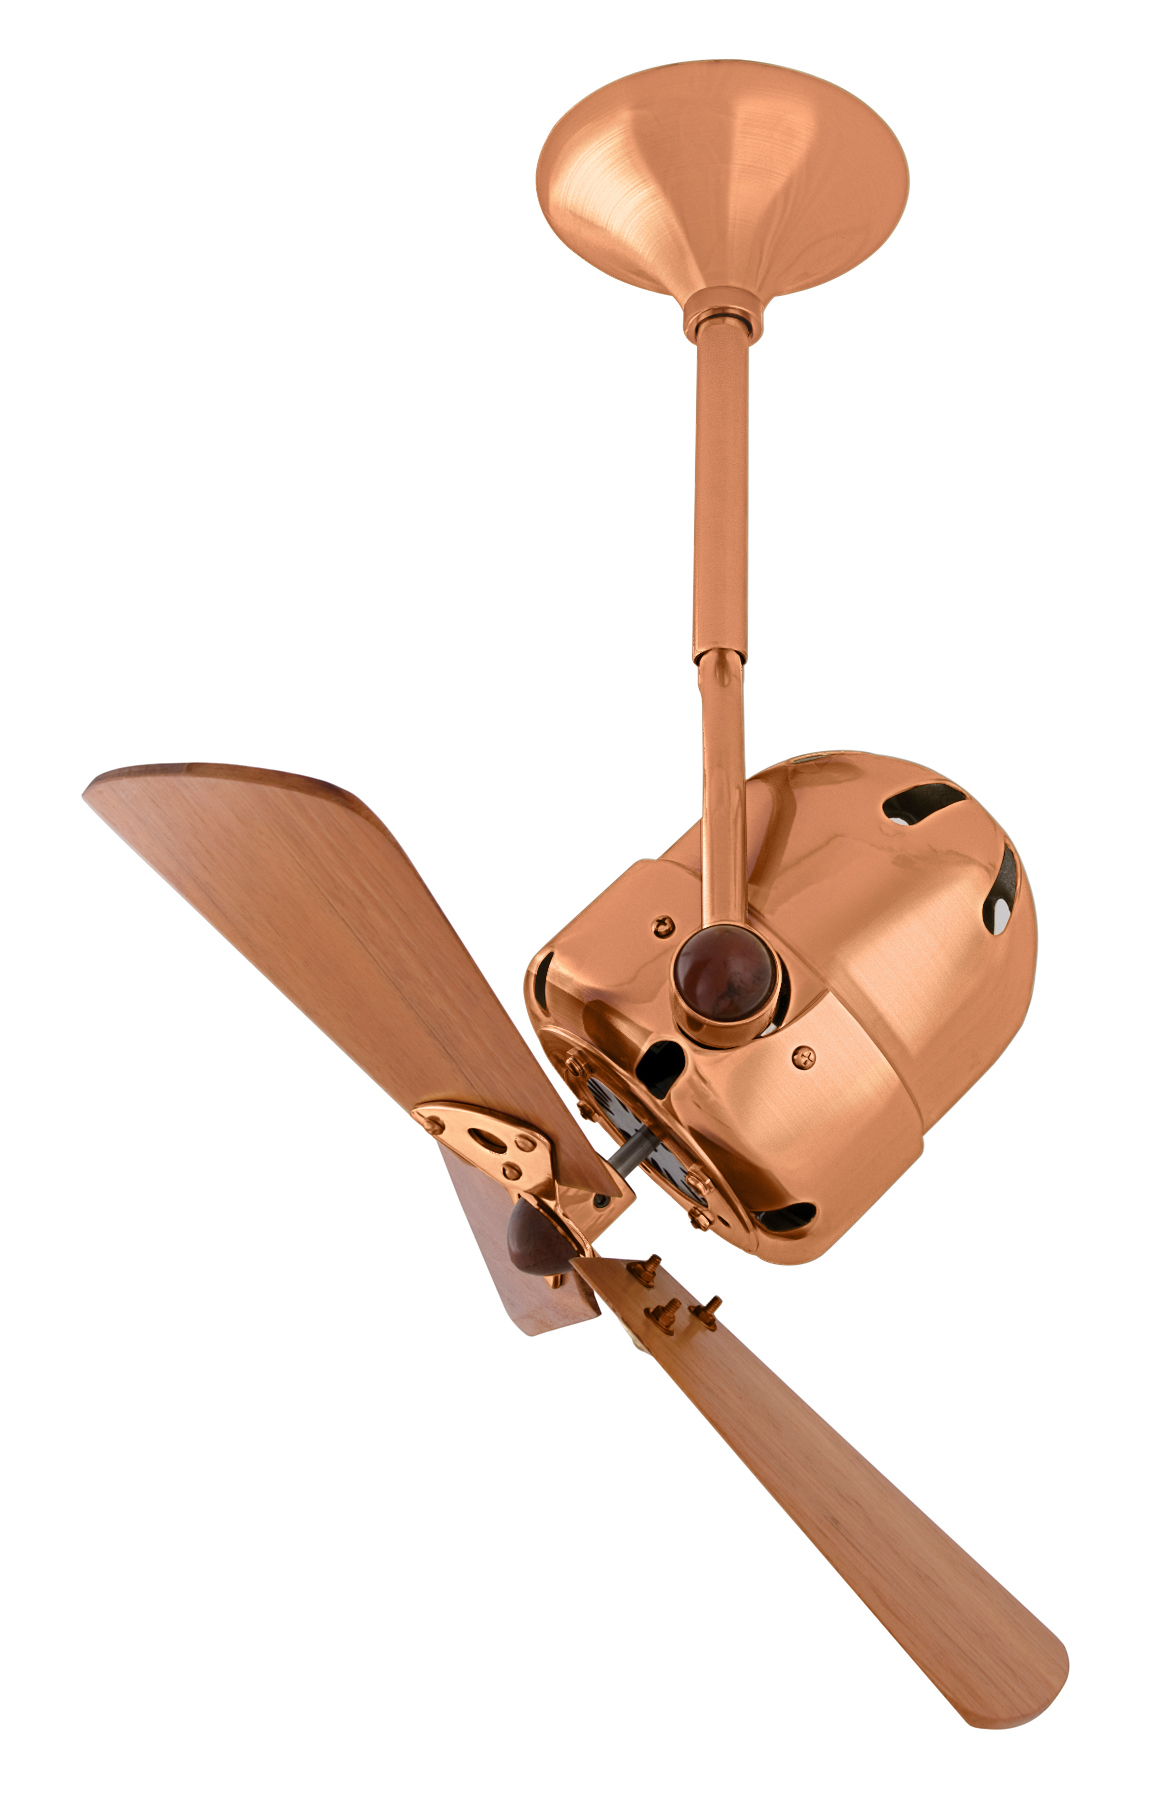 Bianca Direcional ceiling fan in Brushed Copper with Mahogany wood blades made by Matthews Fan Company.